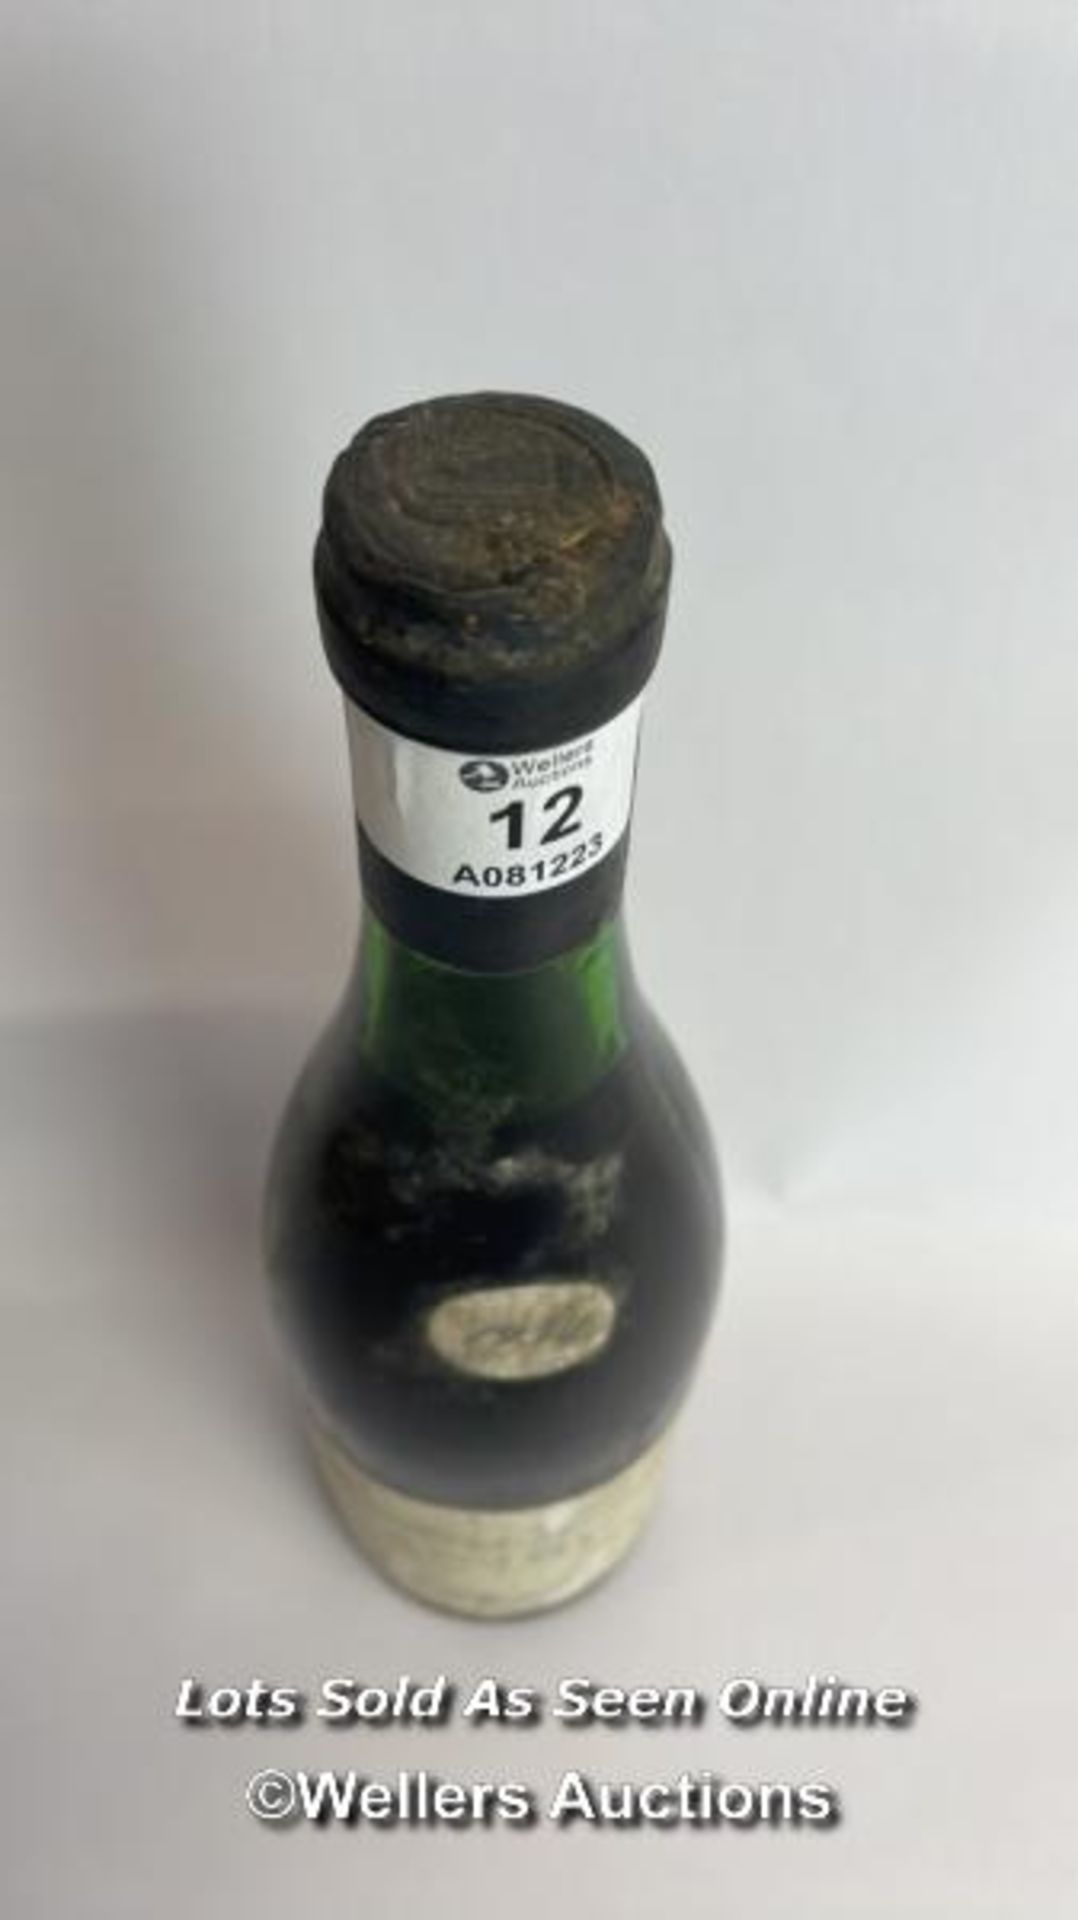 1959 Moulin Touchais Anjou L.Touchais Proprietaire, 73cl, 12% vol / Please see images for fill level - Image 11 of 14